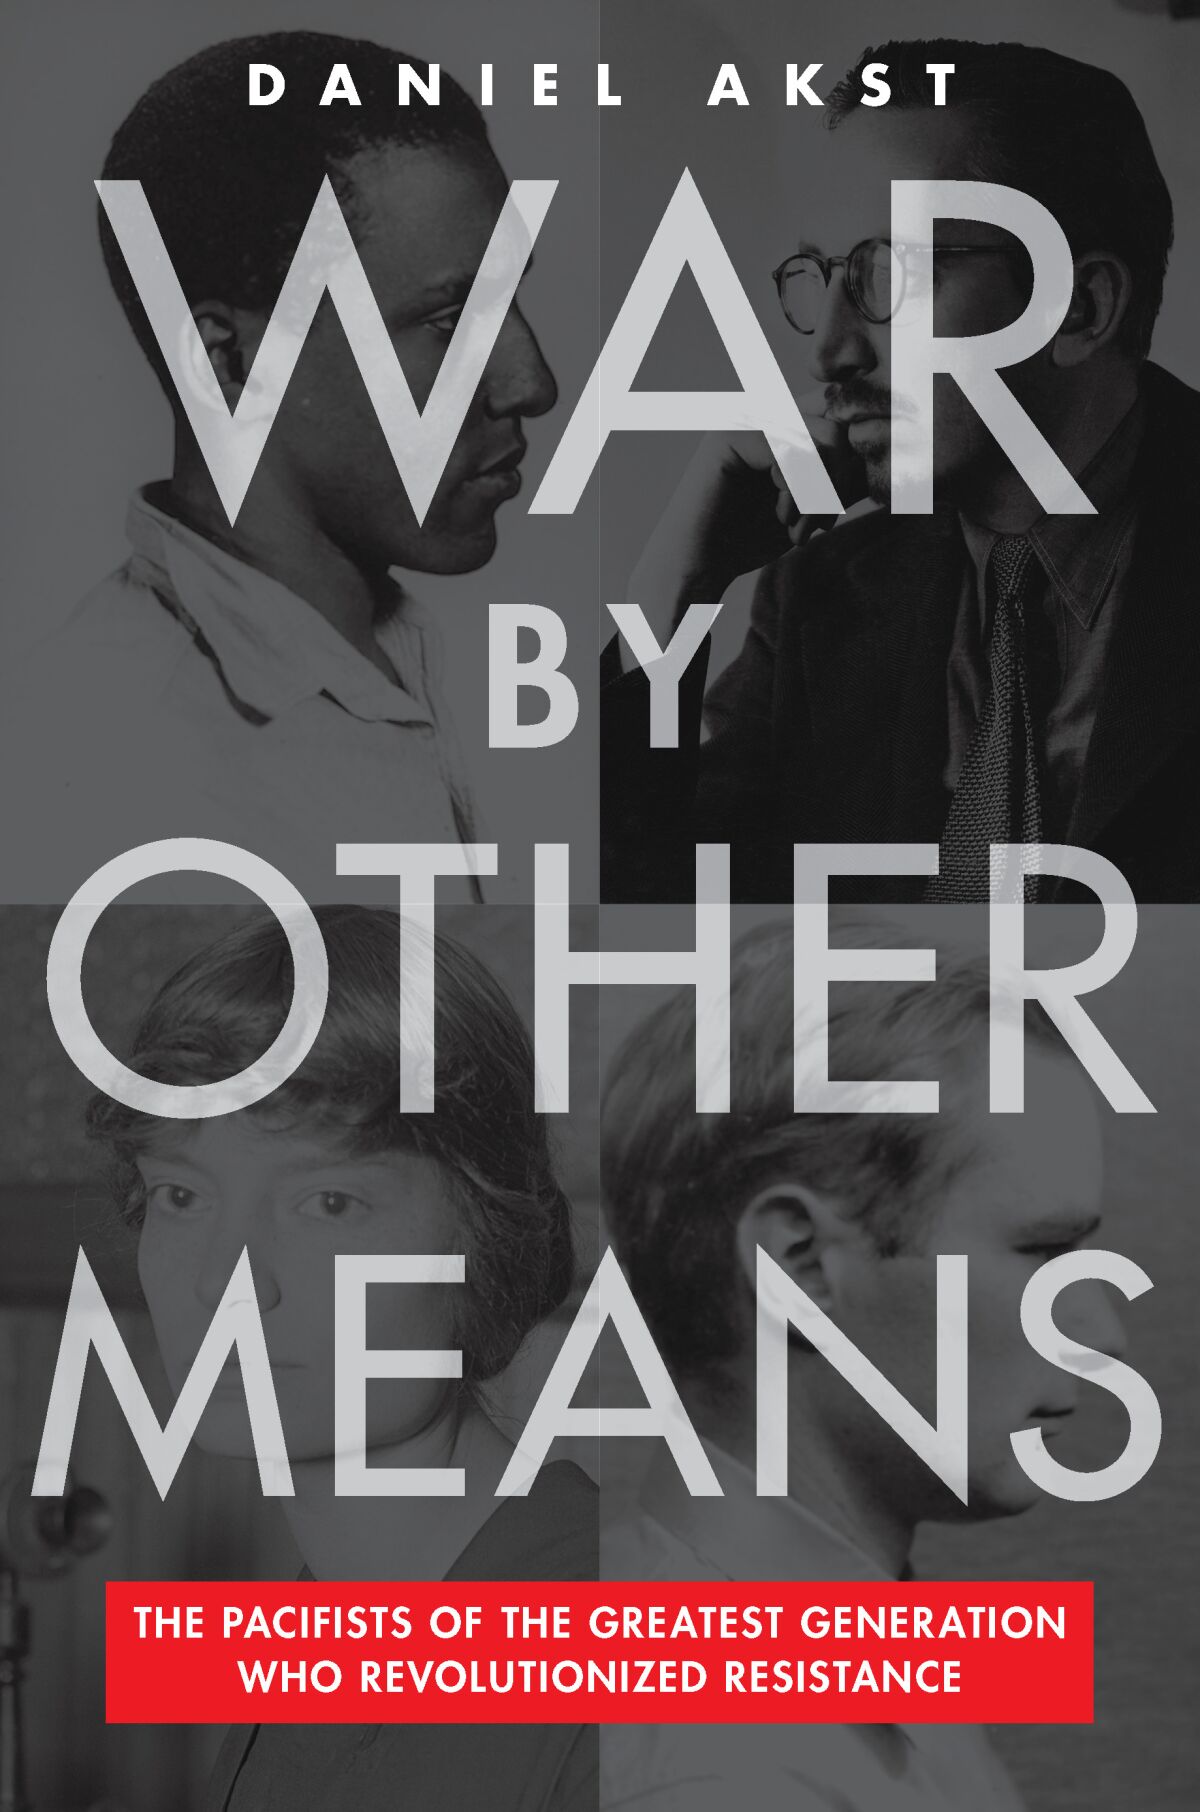 "War By Other Means," by Daniel Akst